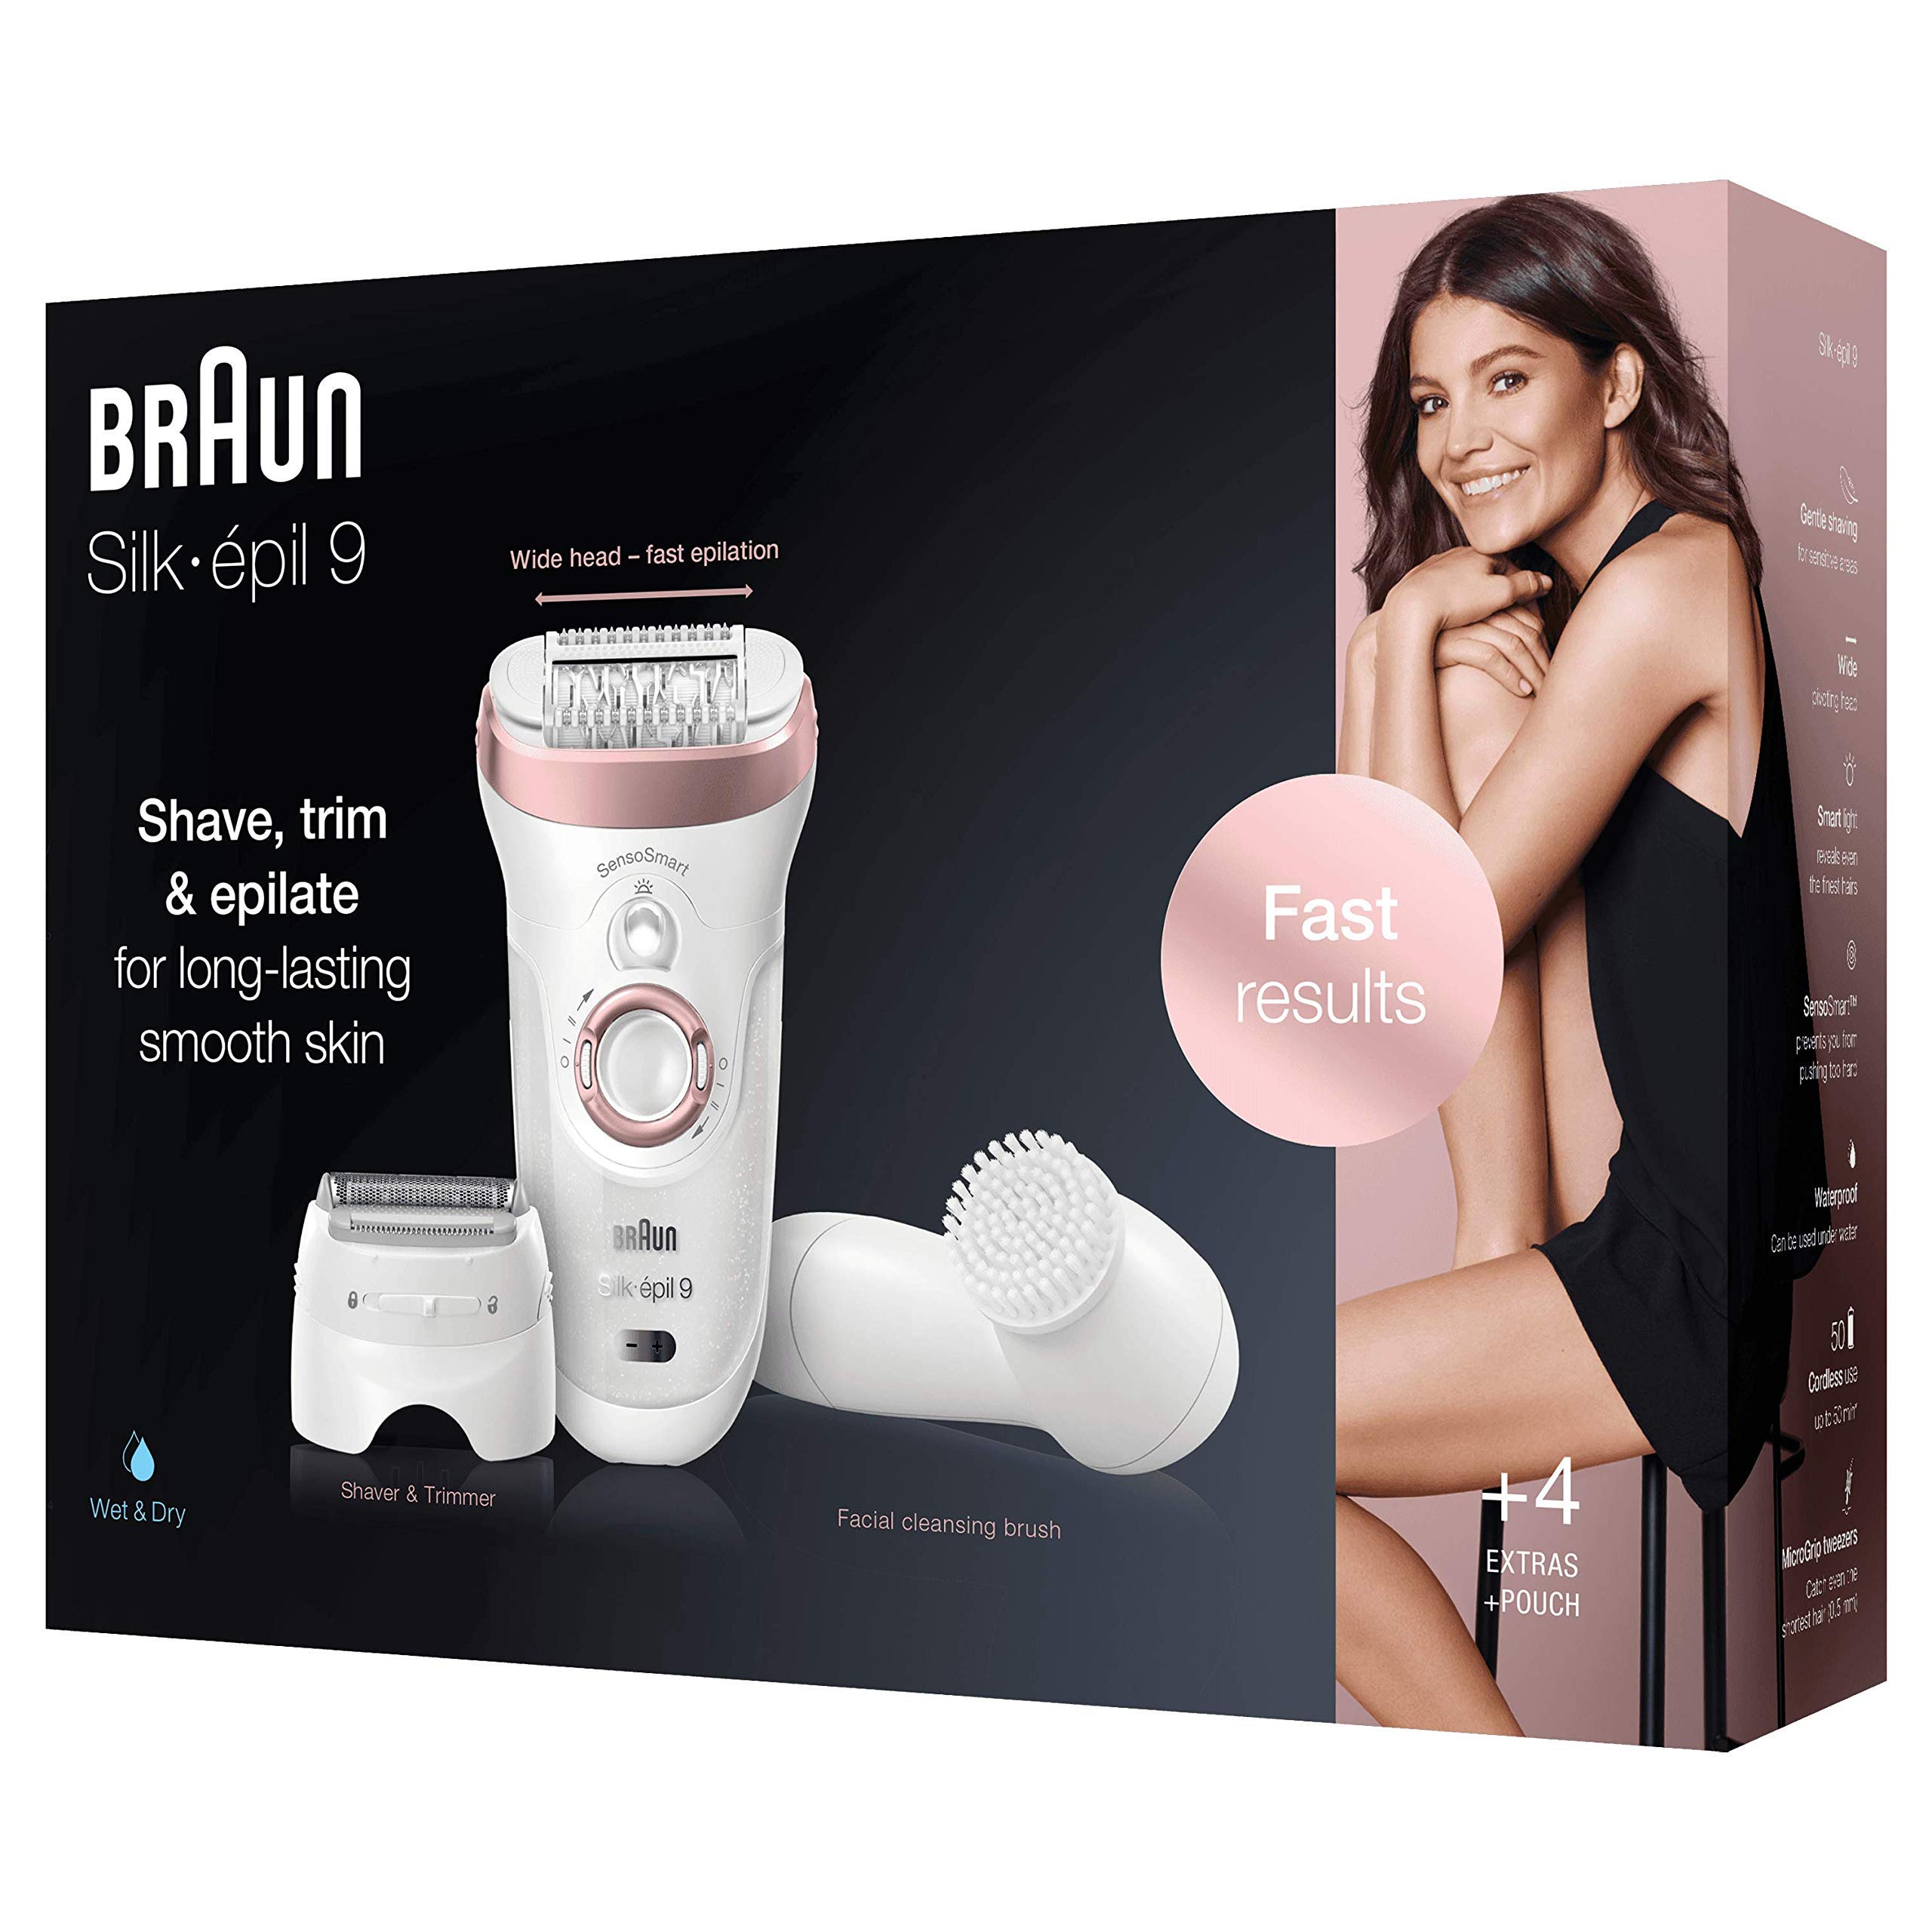 Braun Silk-épil 9-880 Epilator for Long-Lasting Hair Removal Includes a Facial Cleansing Brush High Frequency Massage Cap Shaver and Trimmer Head Cordless Wet and Dry Epilation for Women